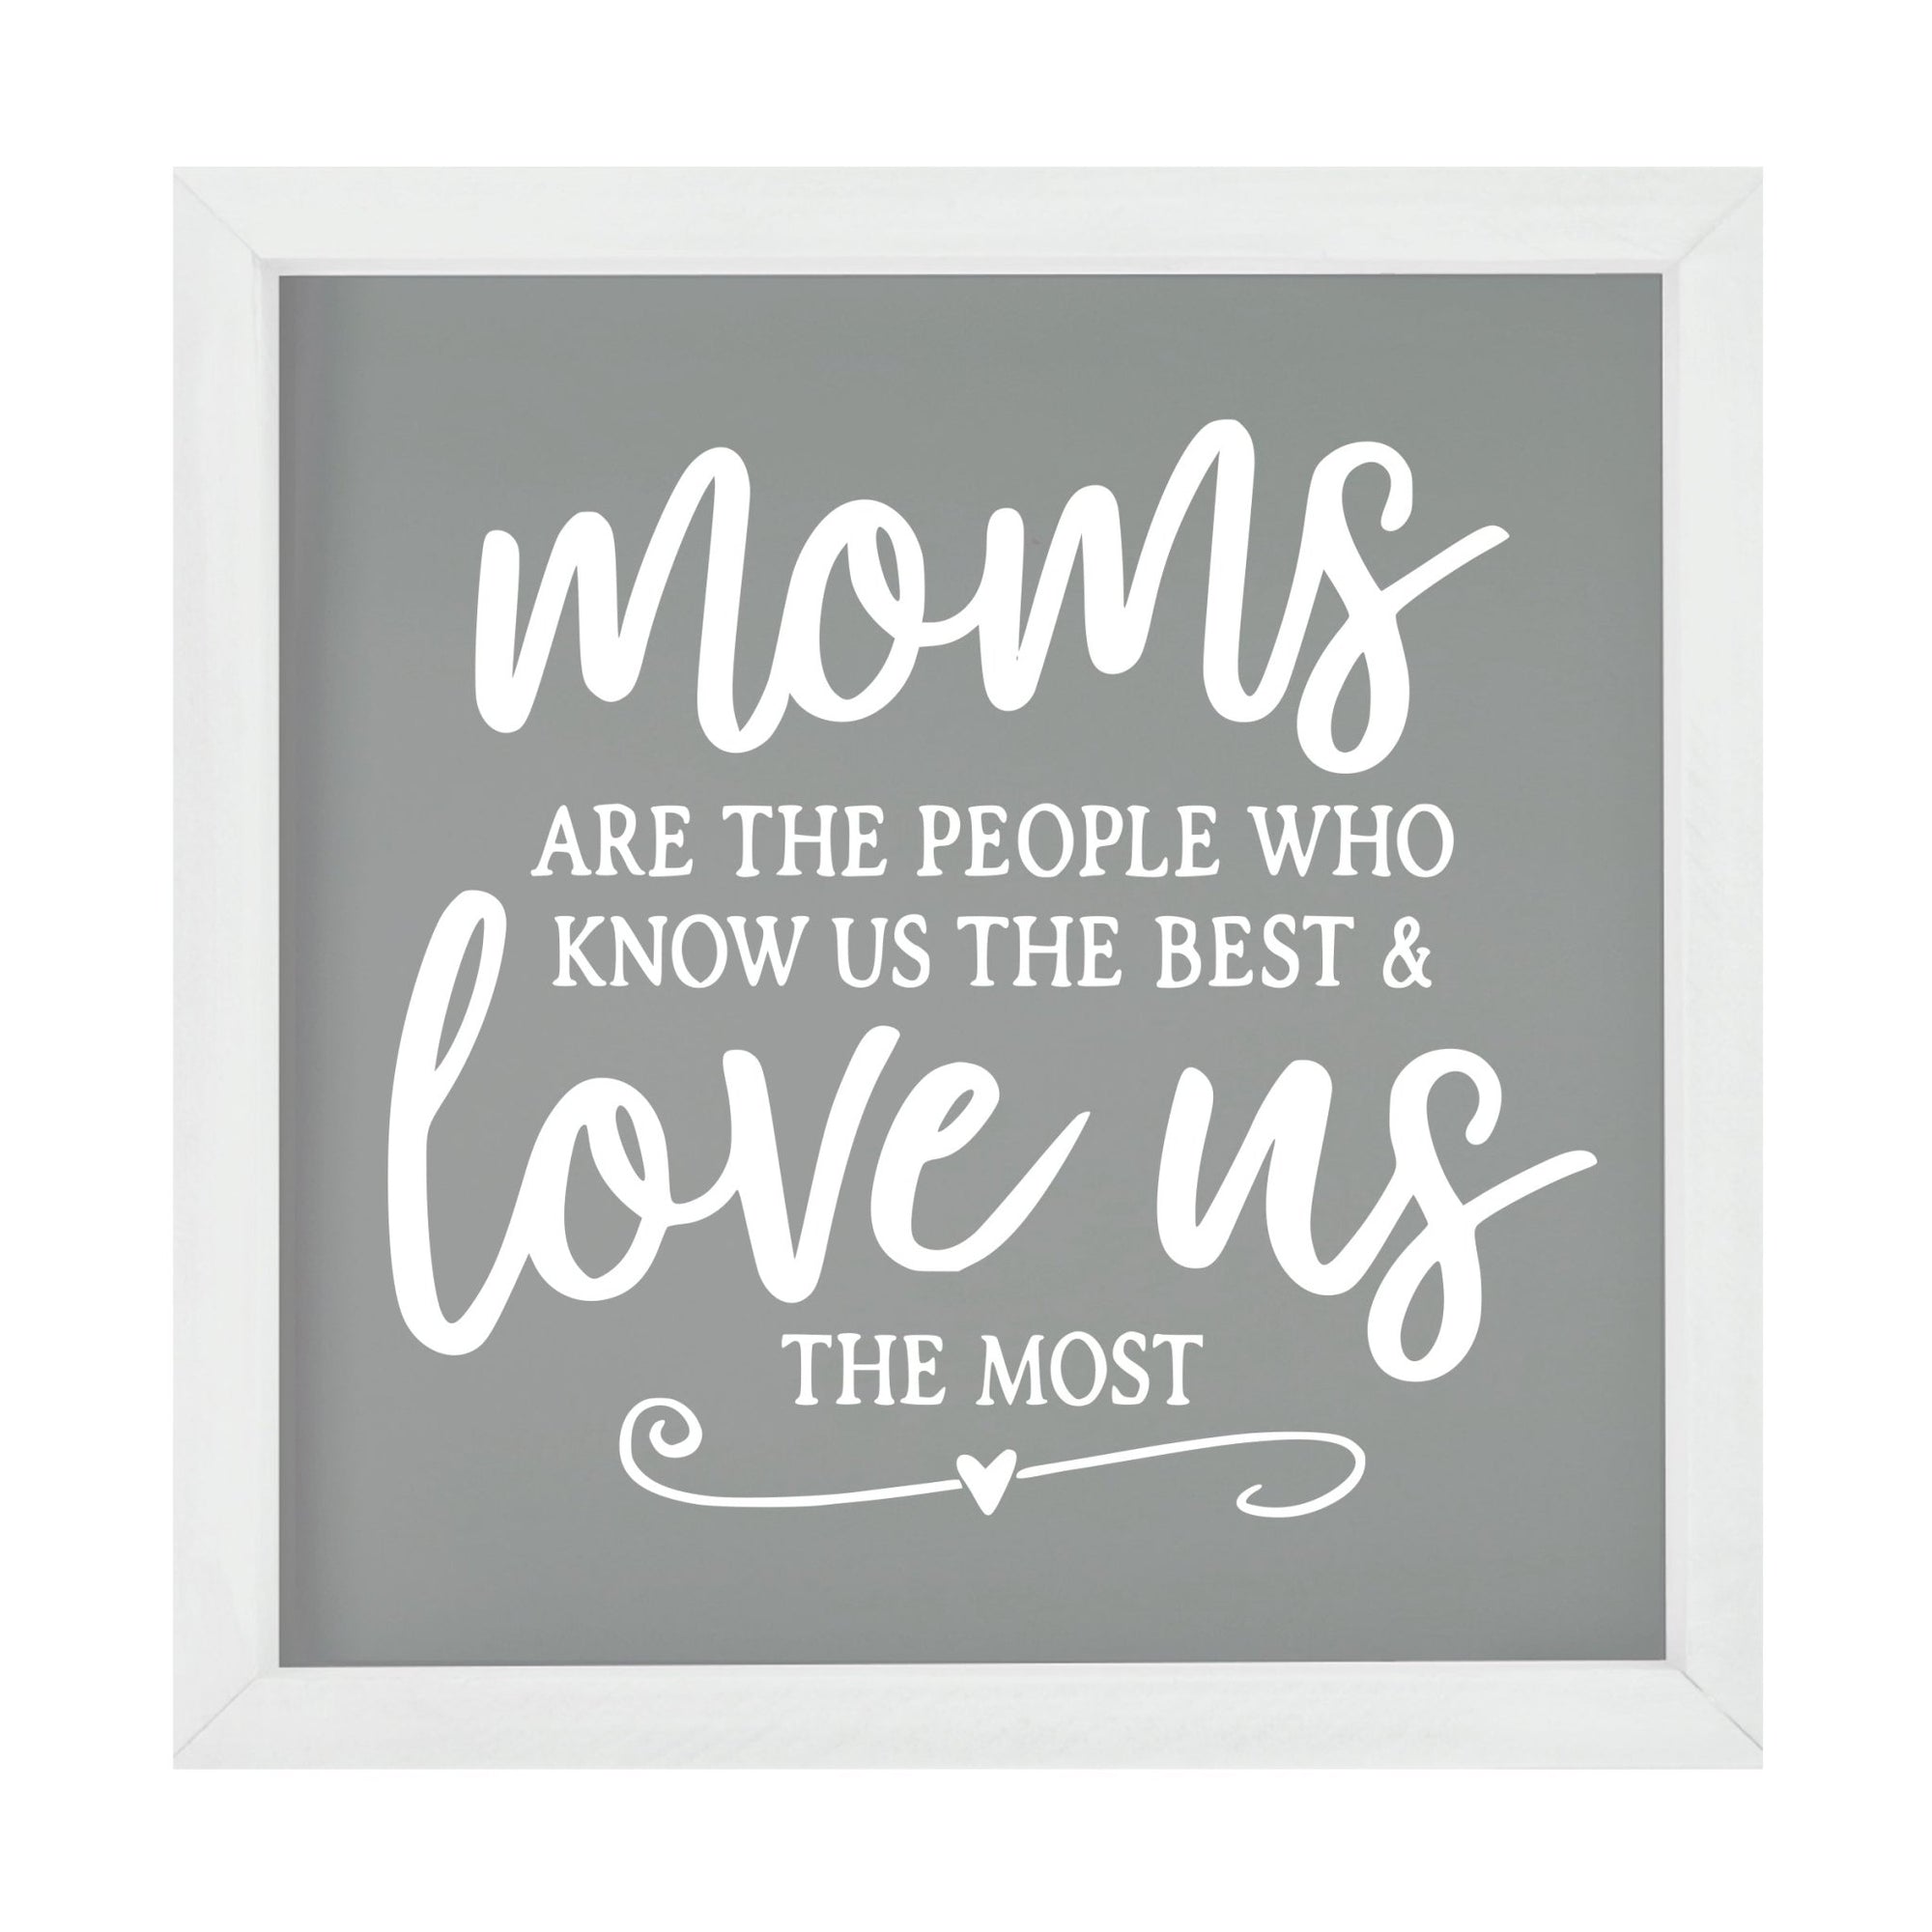 Inspiring Modern Framed Shadow Box 7x7in - Mom Are The People Who Know Us The Best - LifeSong Milestones